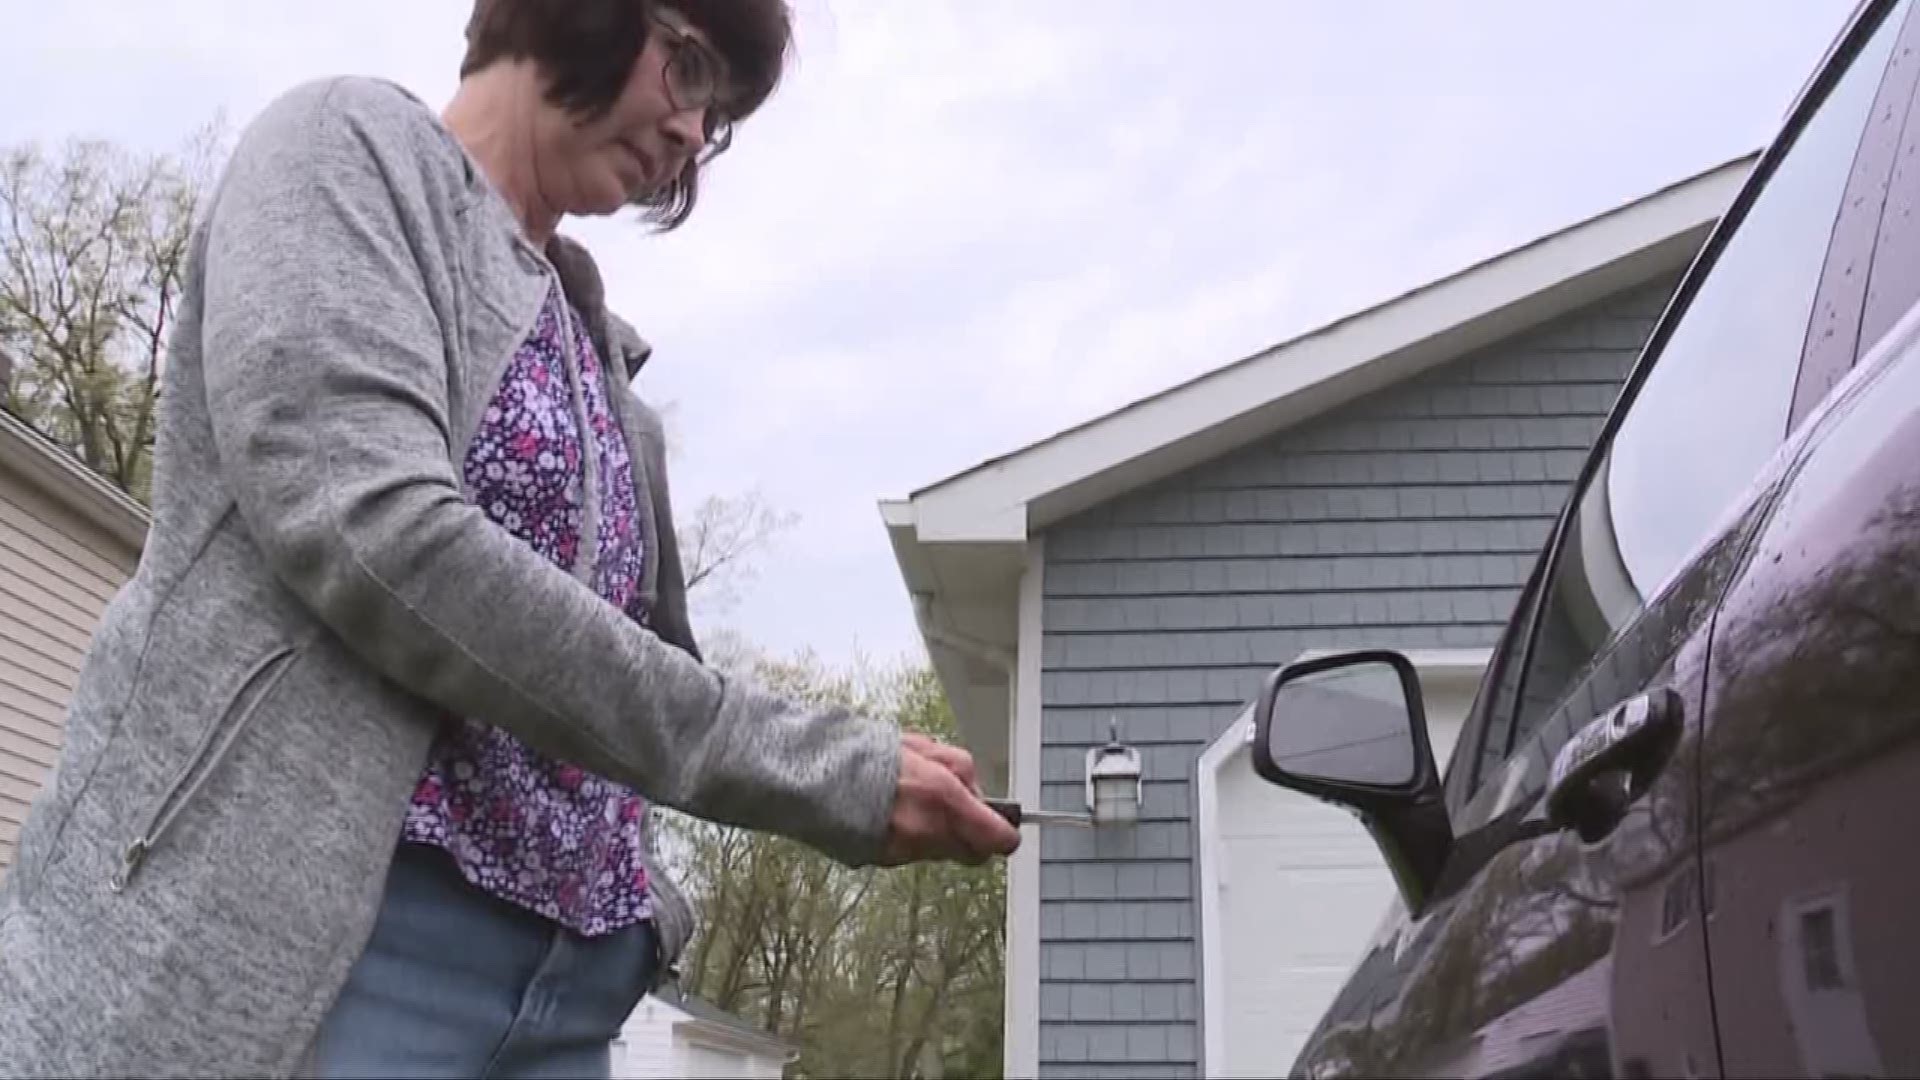 Key fobs and garage openers mysteriously stop working in North Olmsted neighborhood